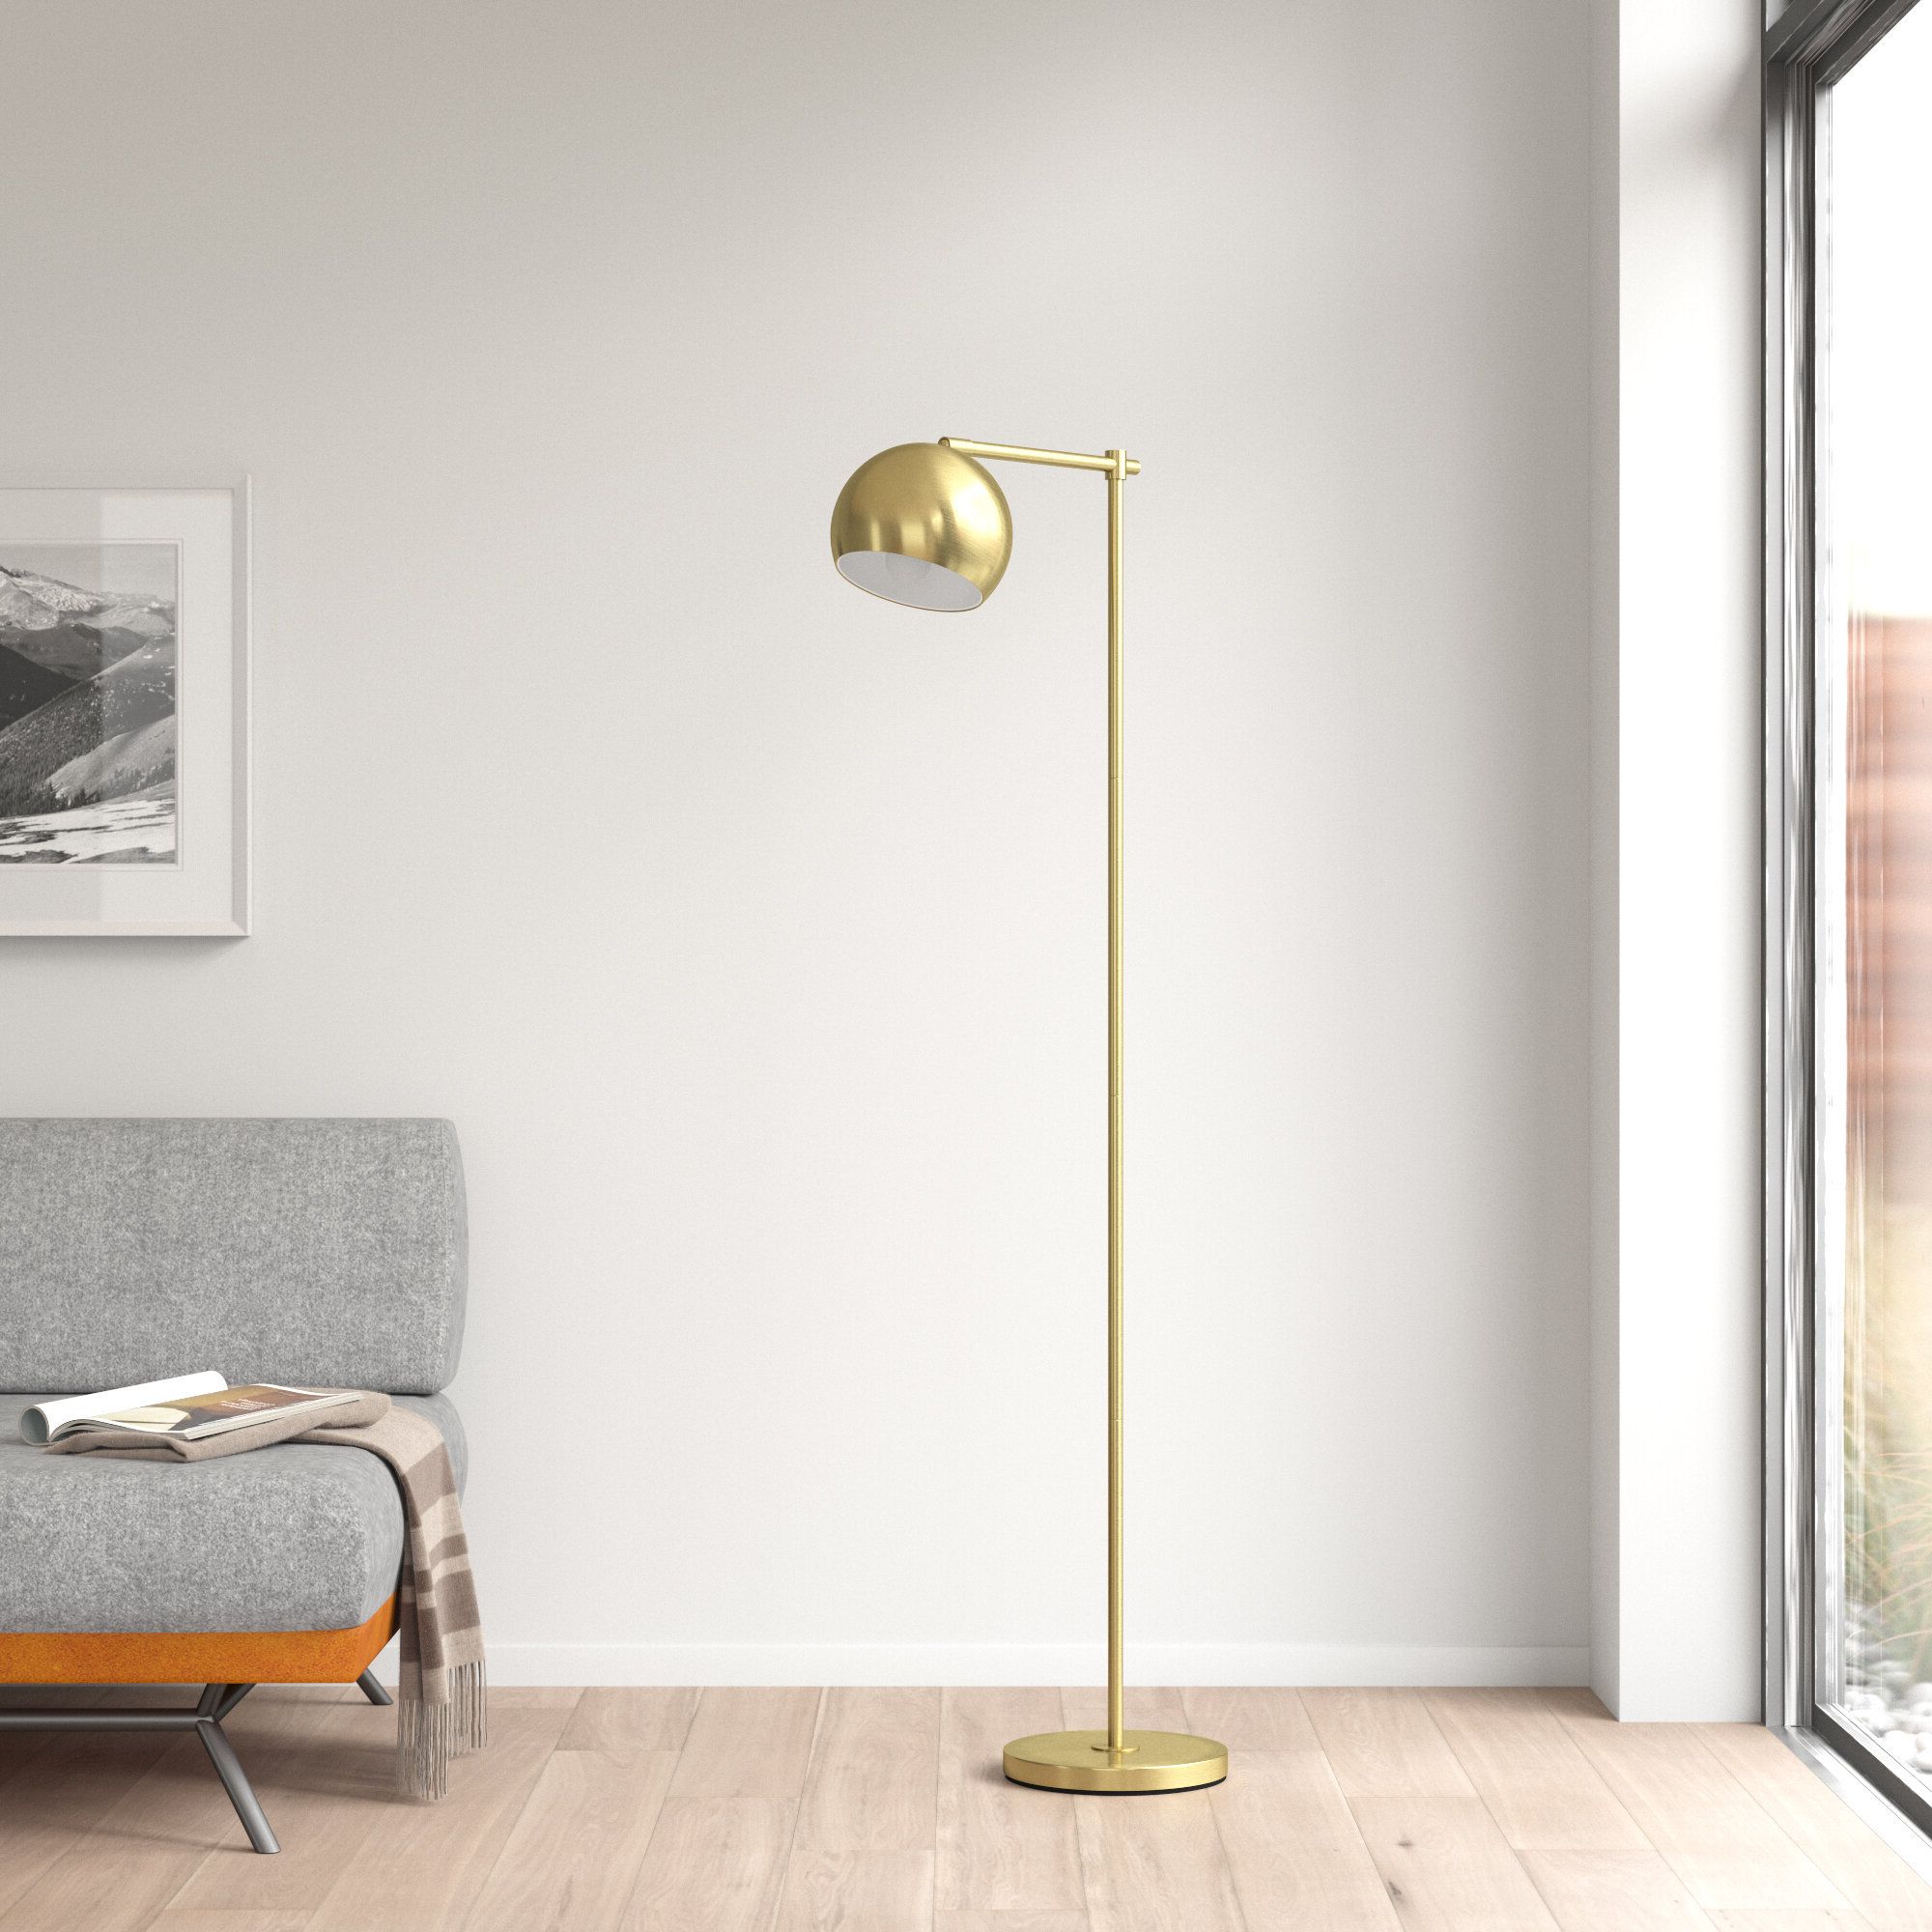 Preferred Gold Floor Lamps For Mercer41 Cianciulli 60" Reading Floor Lamp & Reviews (View 2 of 15)